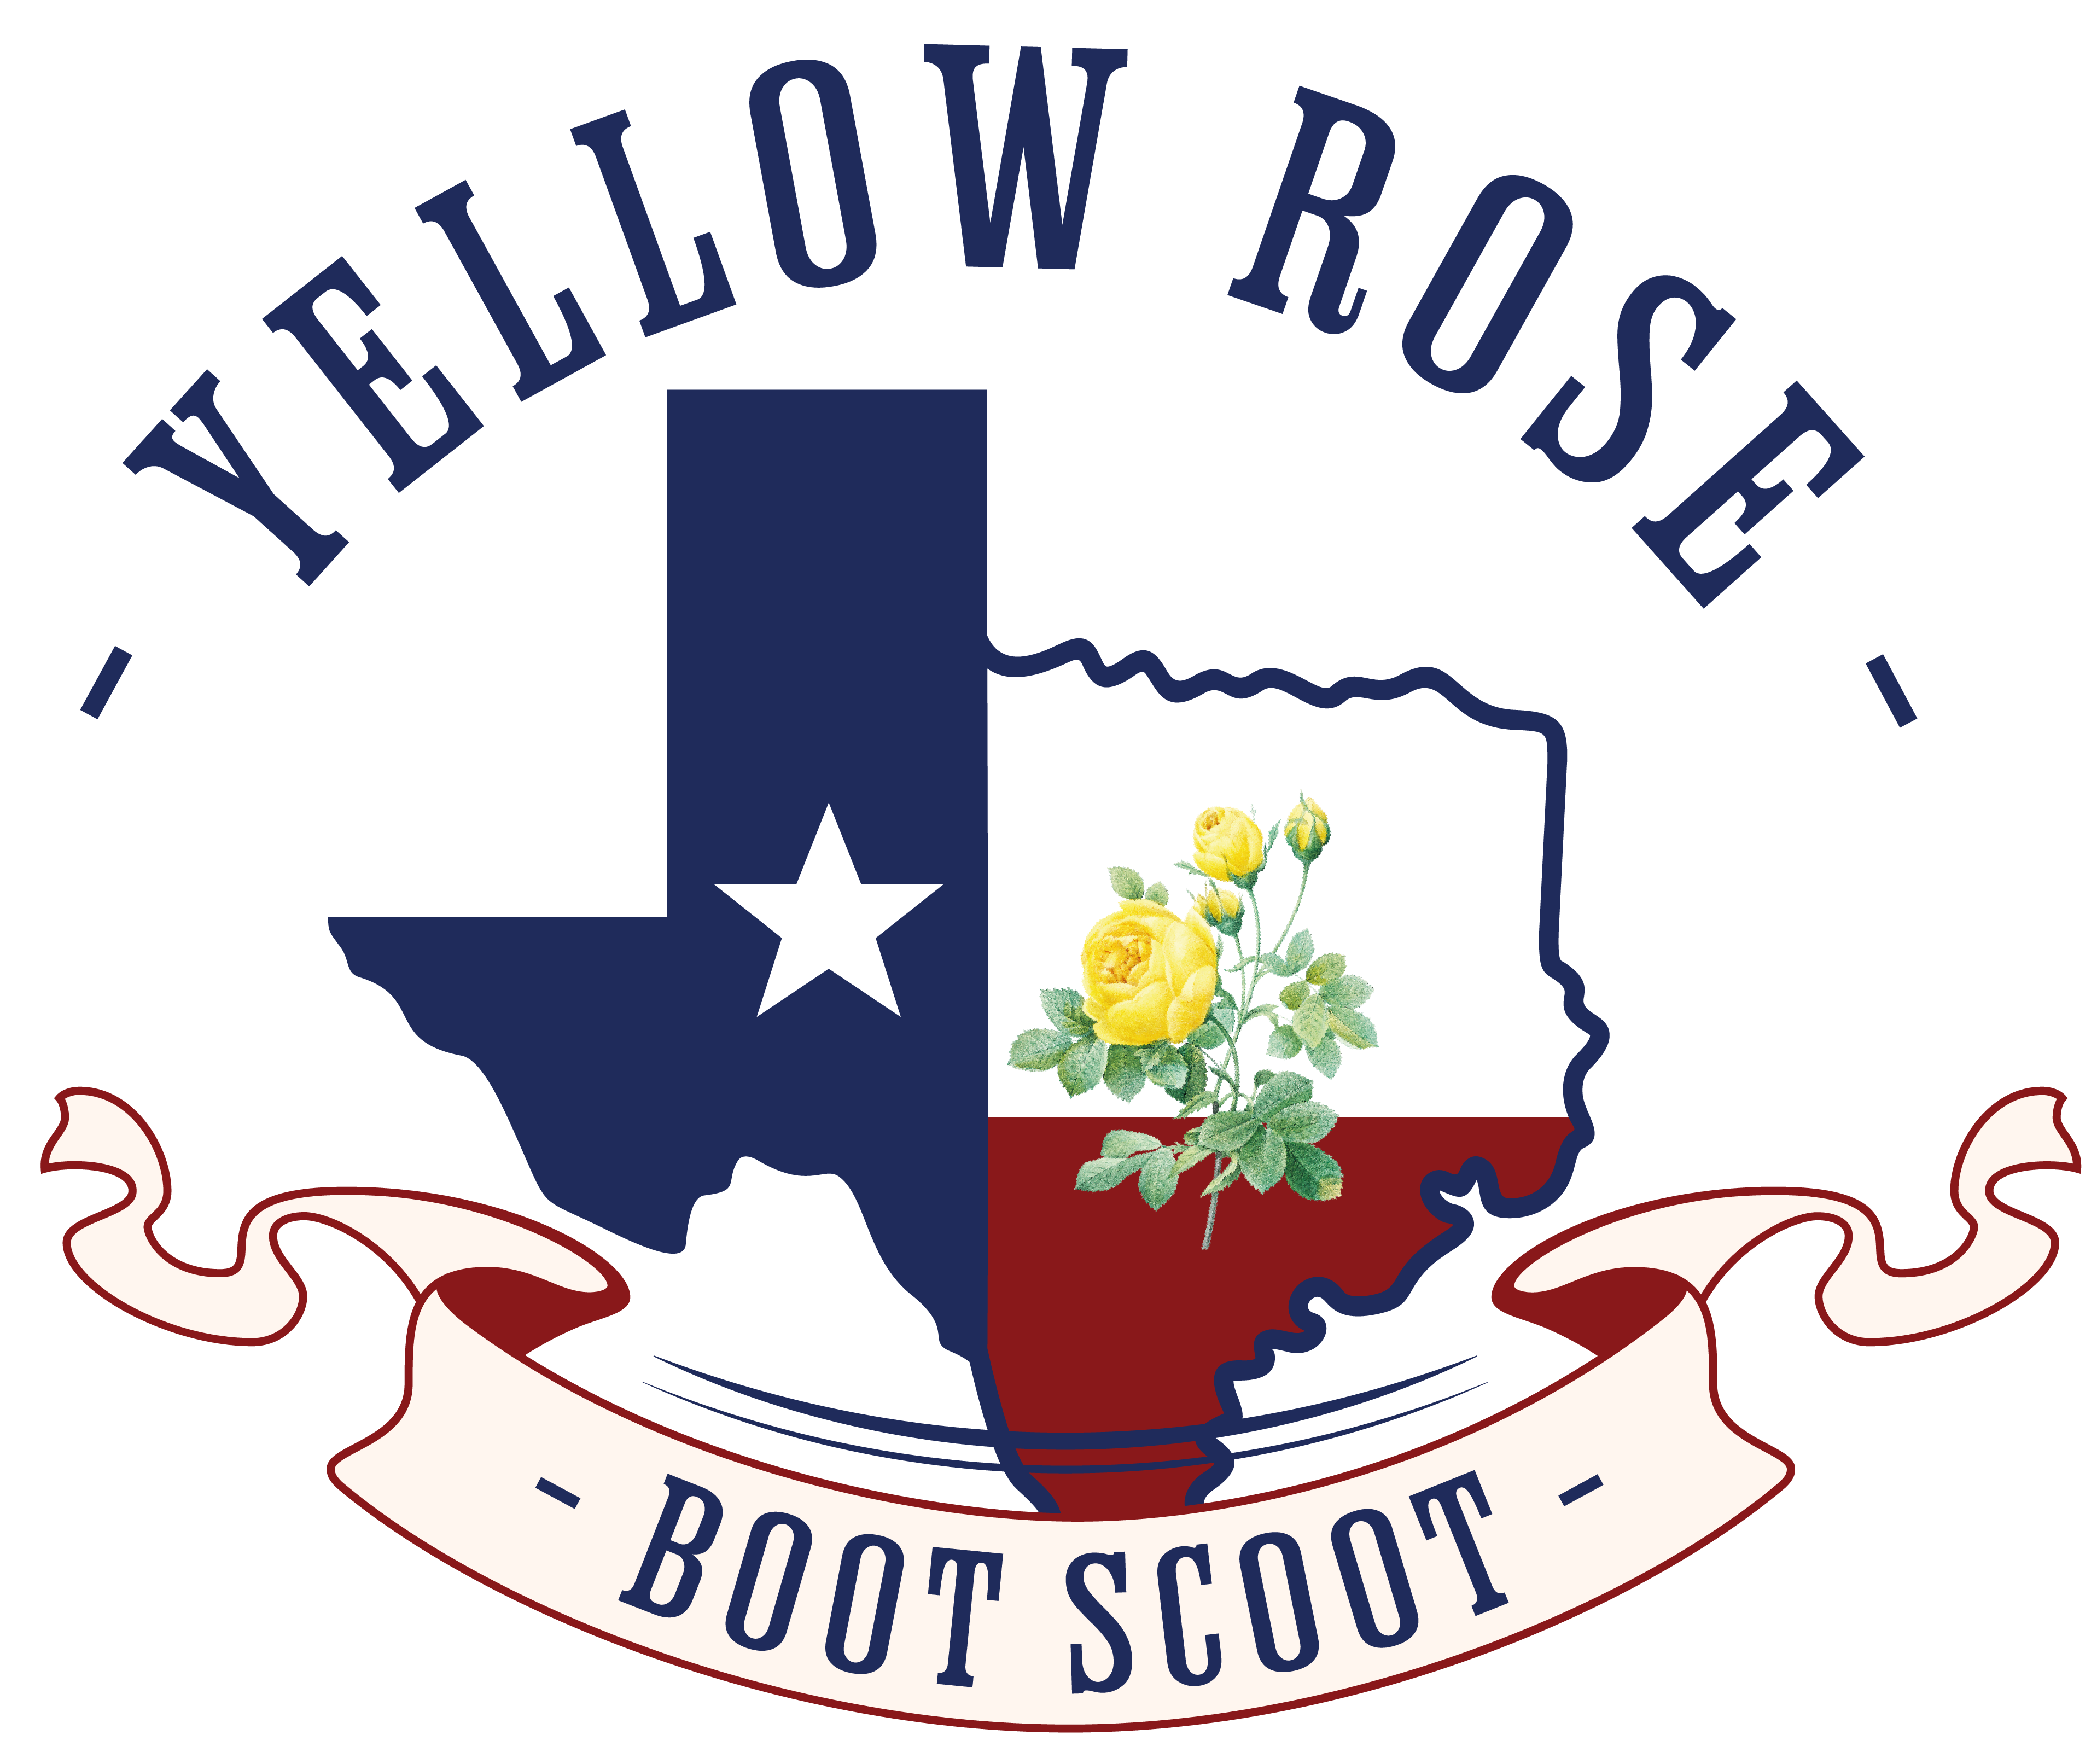 Yellow Rose Boot Scoot